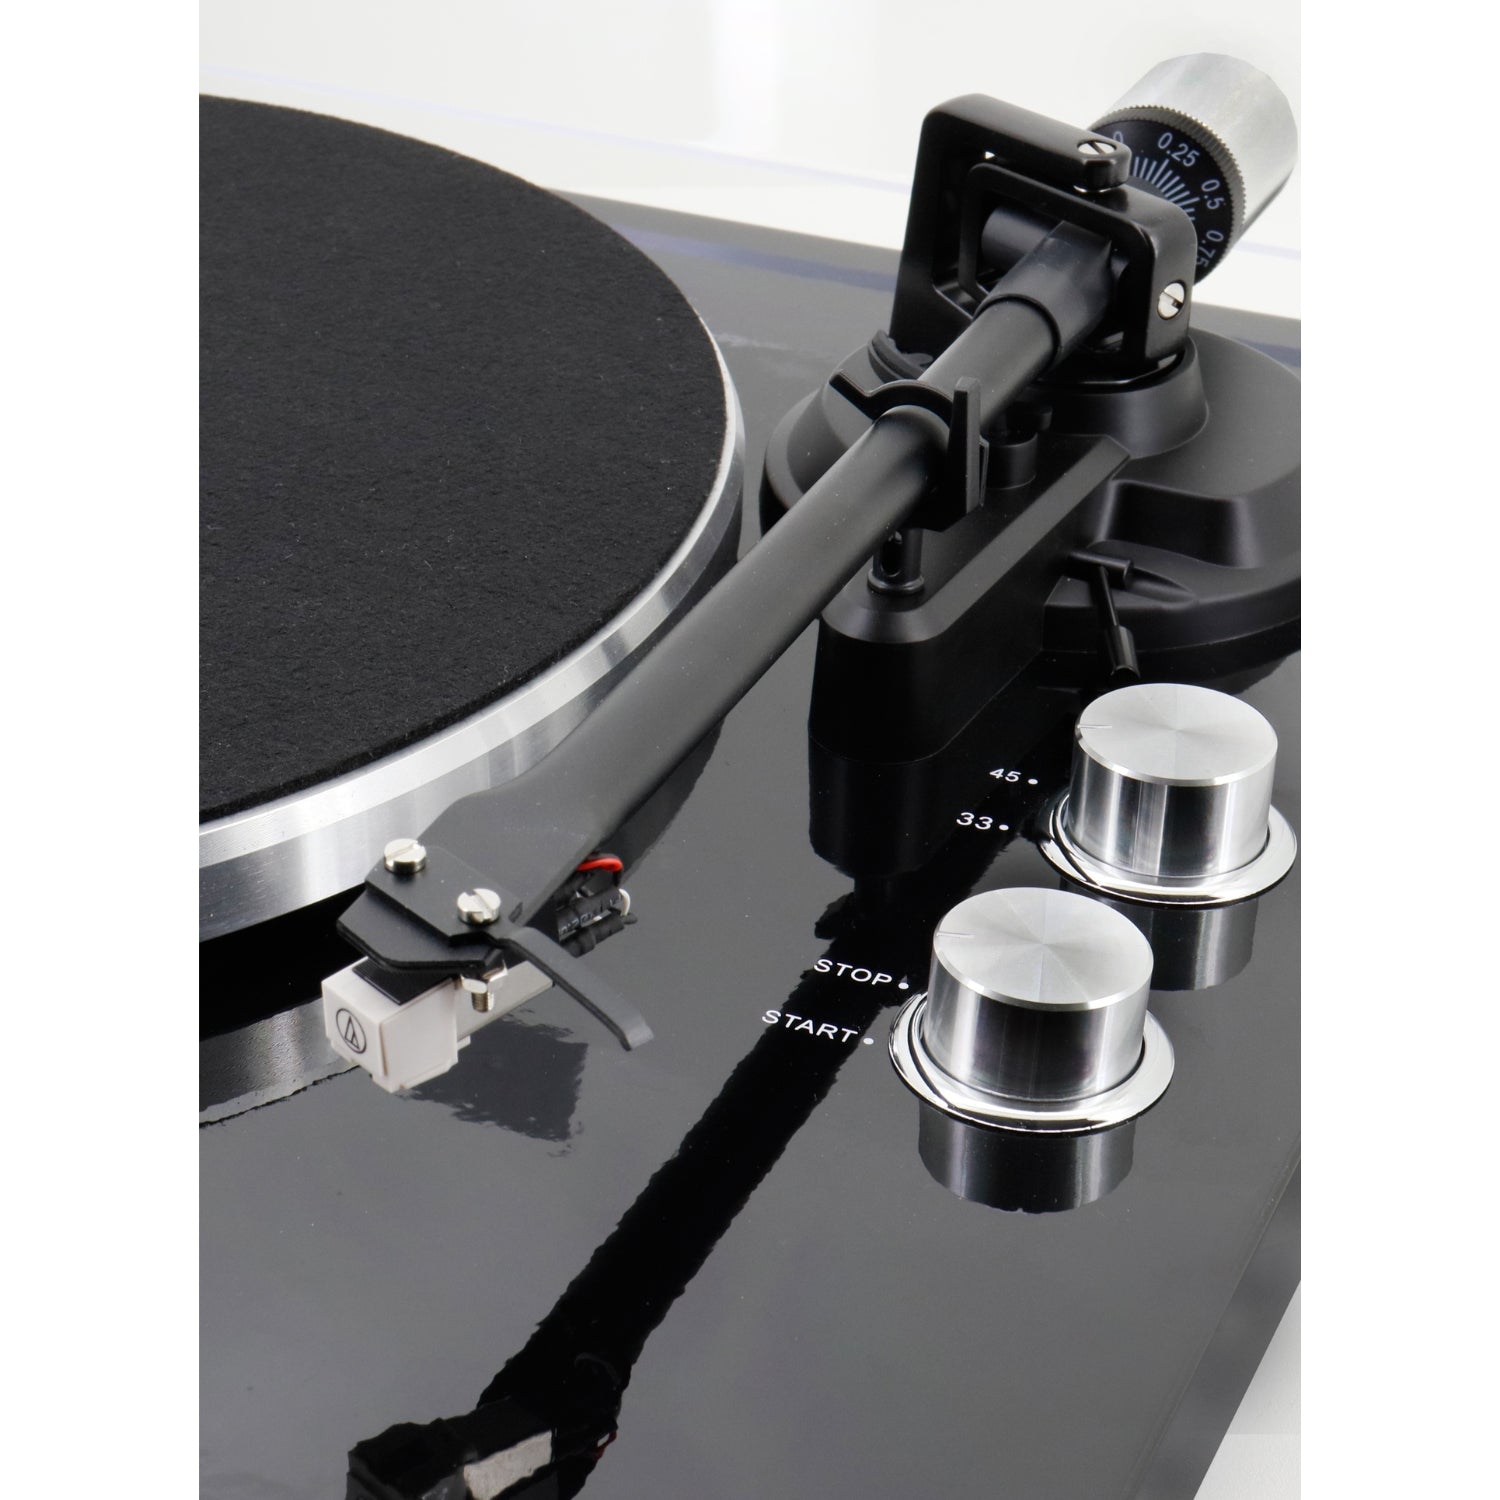 Soundmaster EliteLine PL790SW turntable with Audio Technica magnetic pickup system and Bluetooth transmission